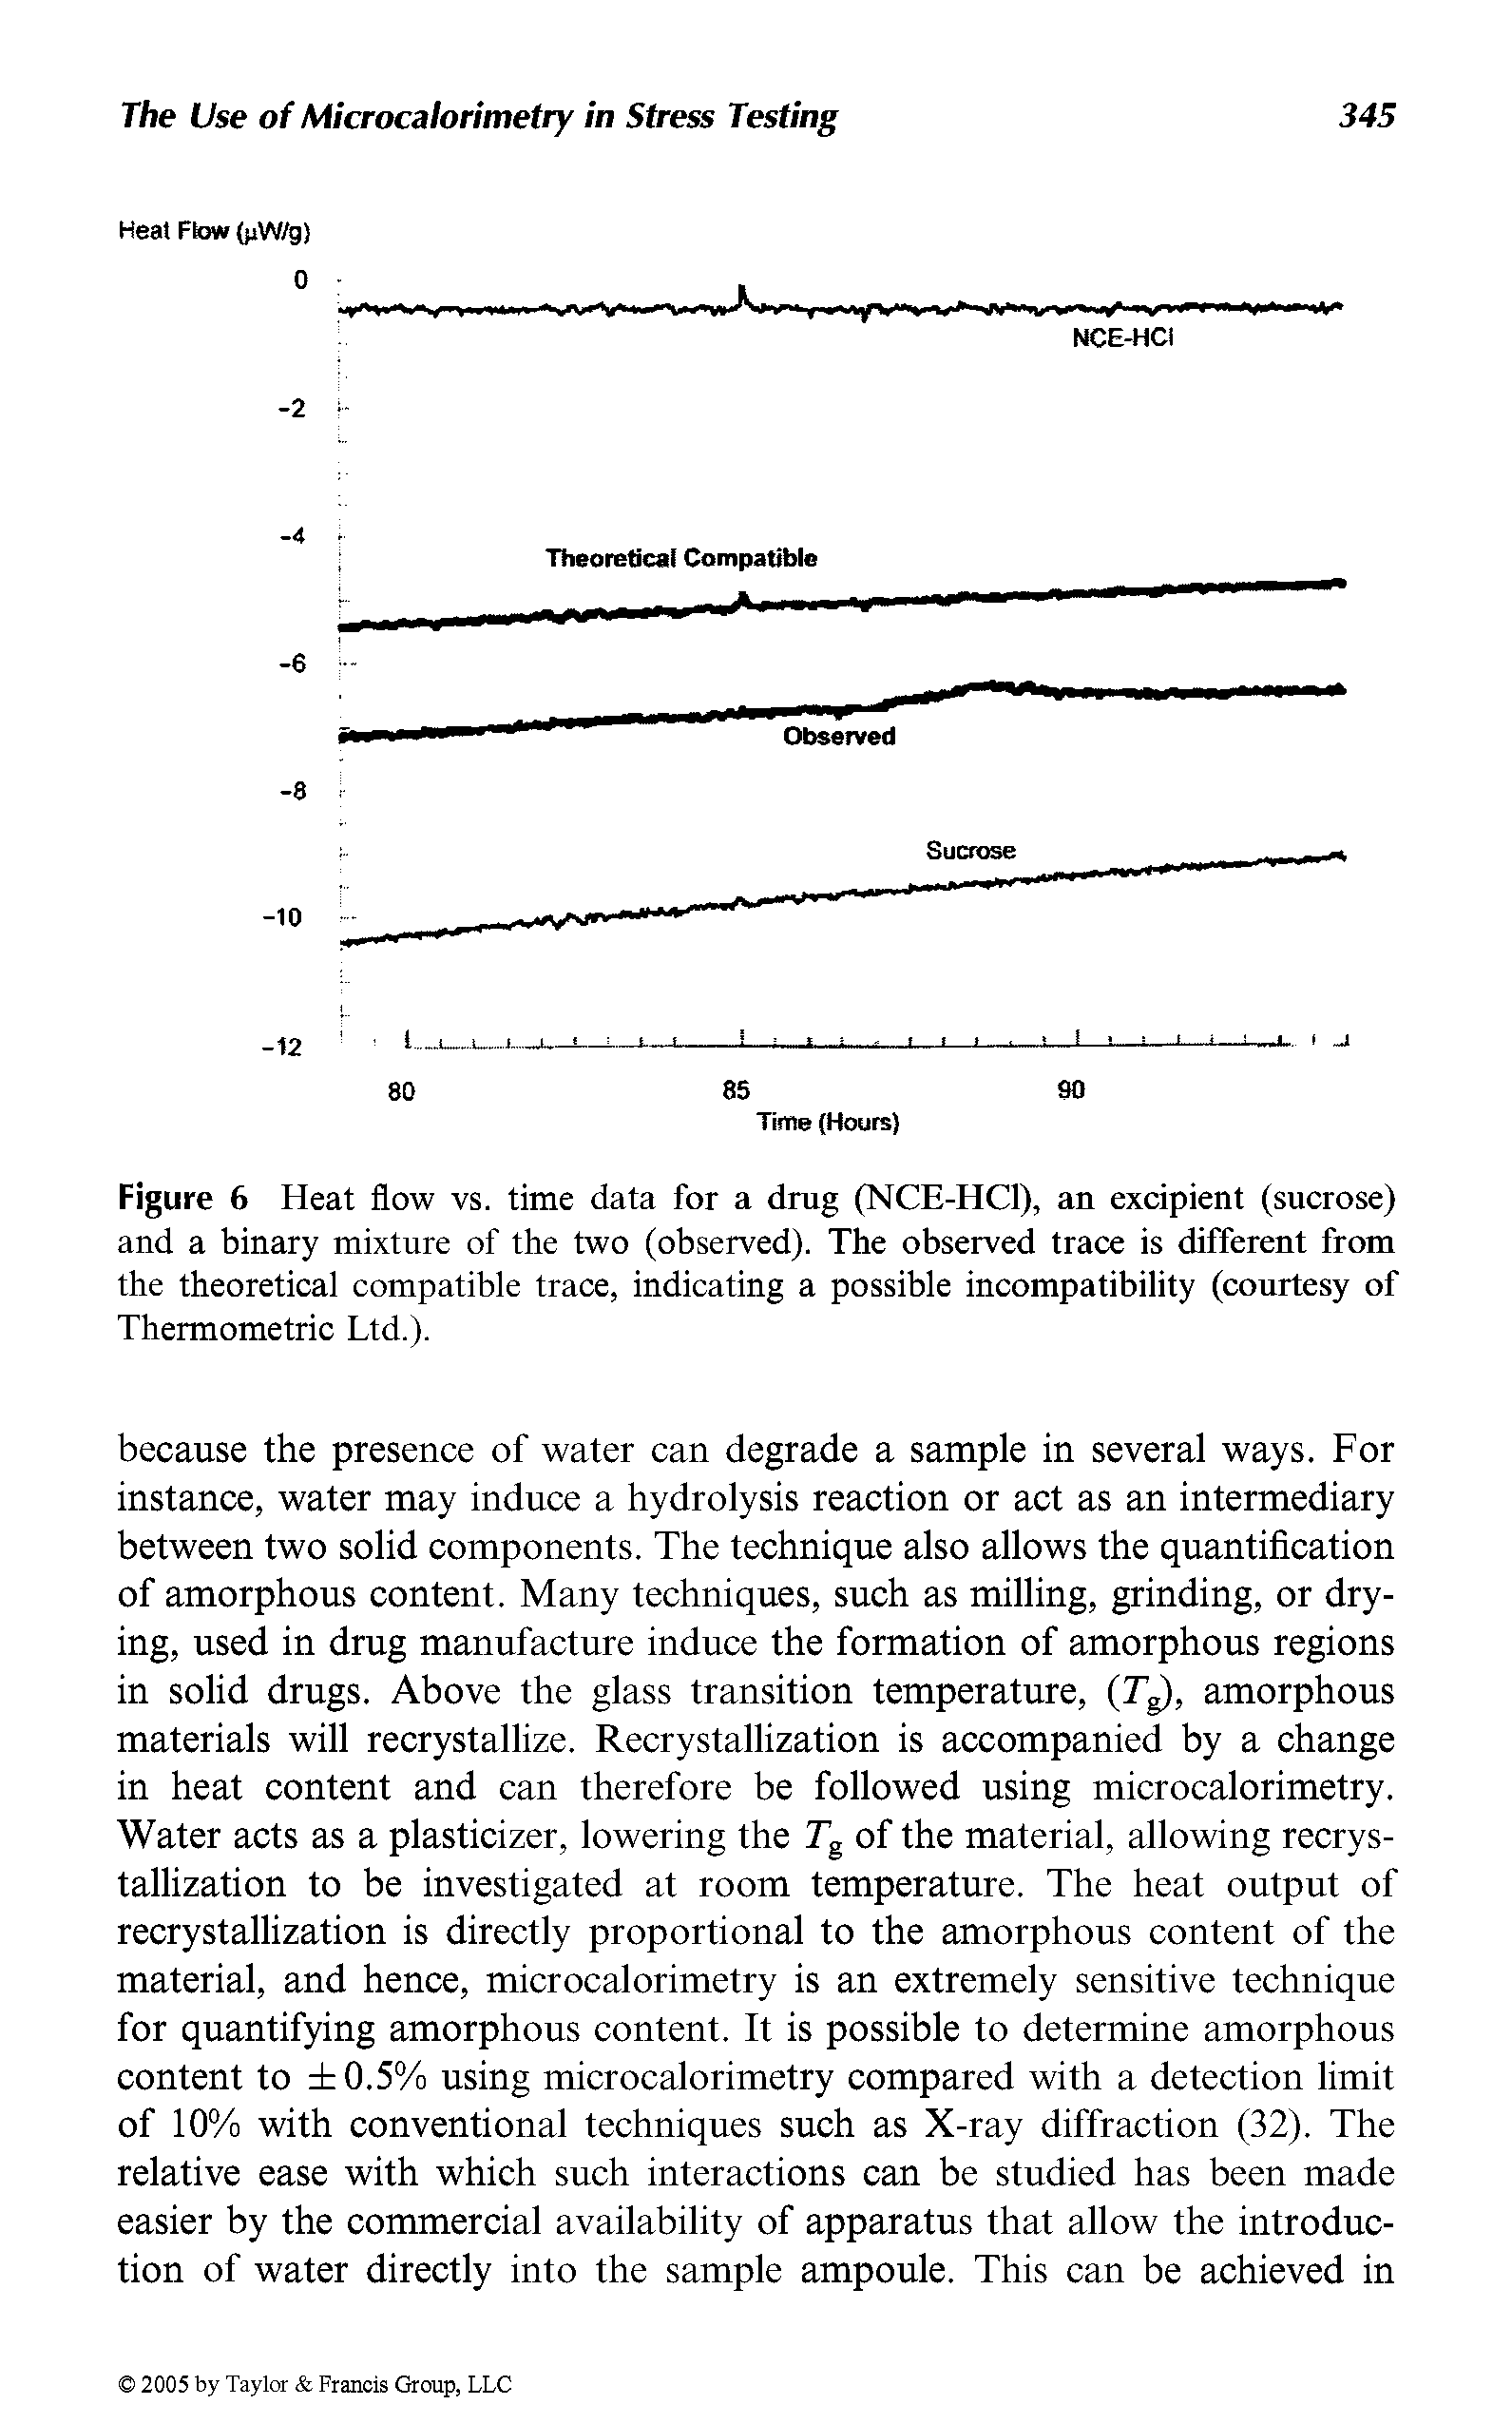 Figure 6 Heat flow vs. time data for a drug (NCE-HC1), an excipient (sucrose) and a binary mixture of the two (observed). The observed trace is different from the theoretical compatible trace, indicating a possible incompatibility (courtesy of Thermometric Ltd.).